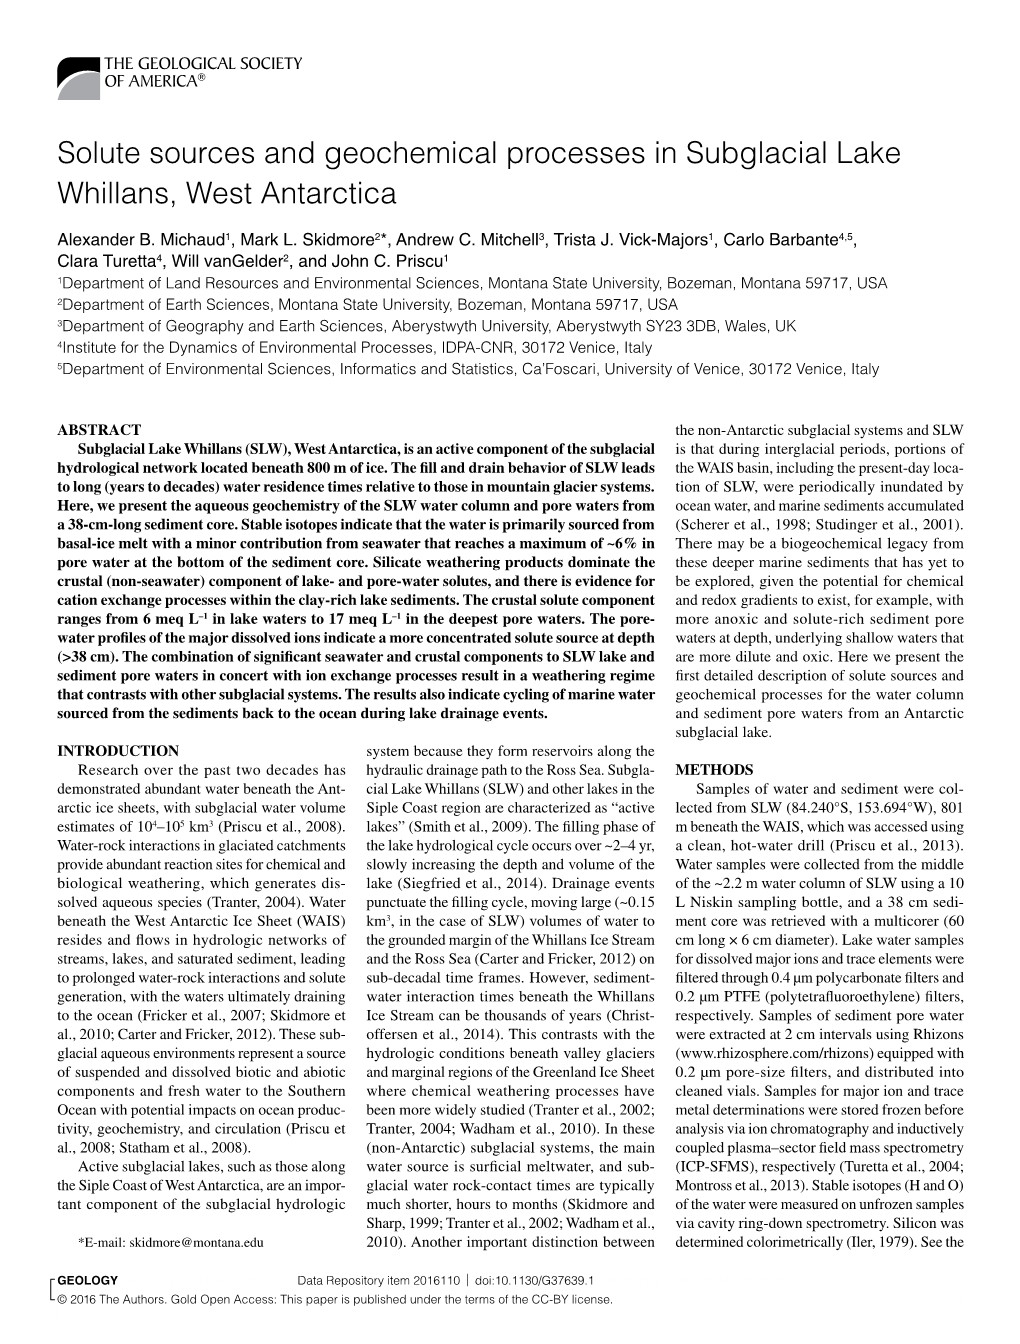 Solute Sources and Geochemical Processes in Subglacial Lake Whillans, West Antarctica